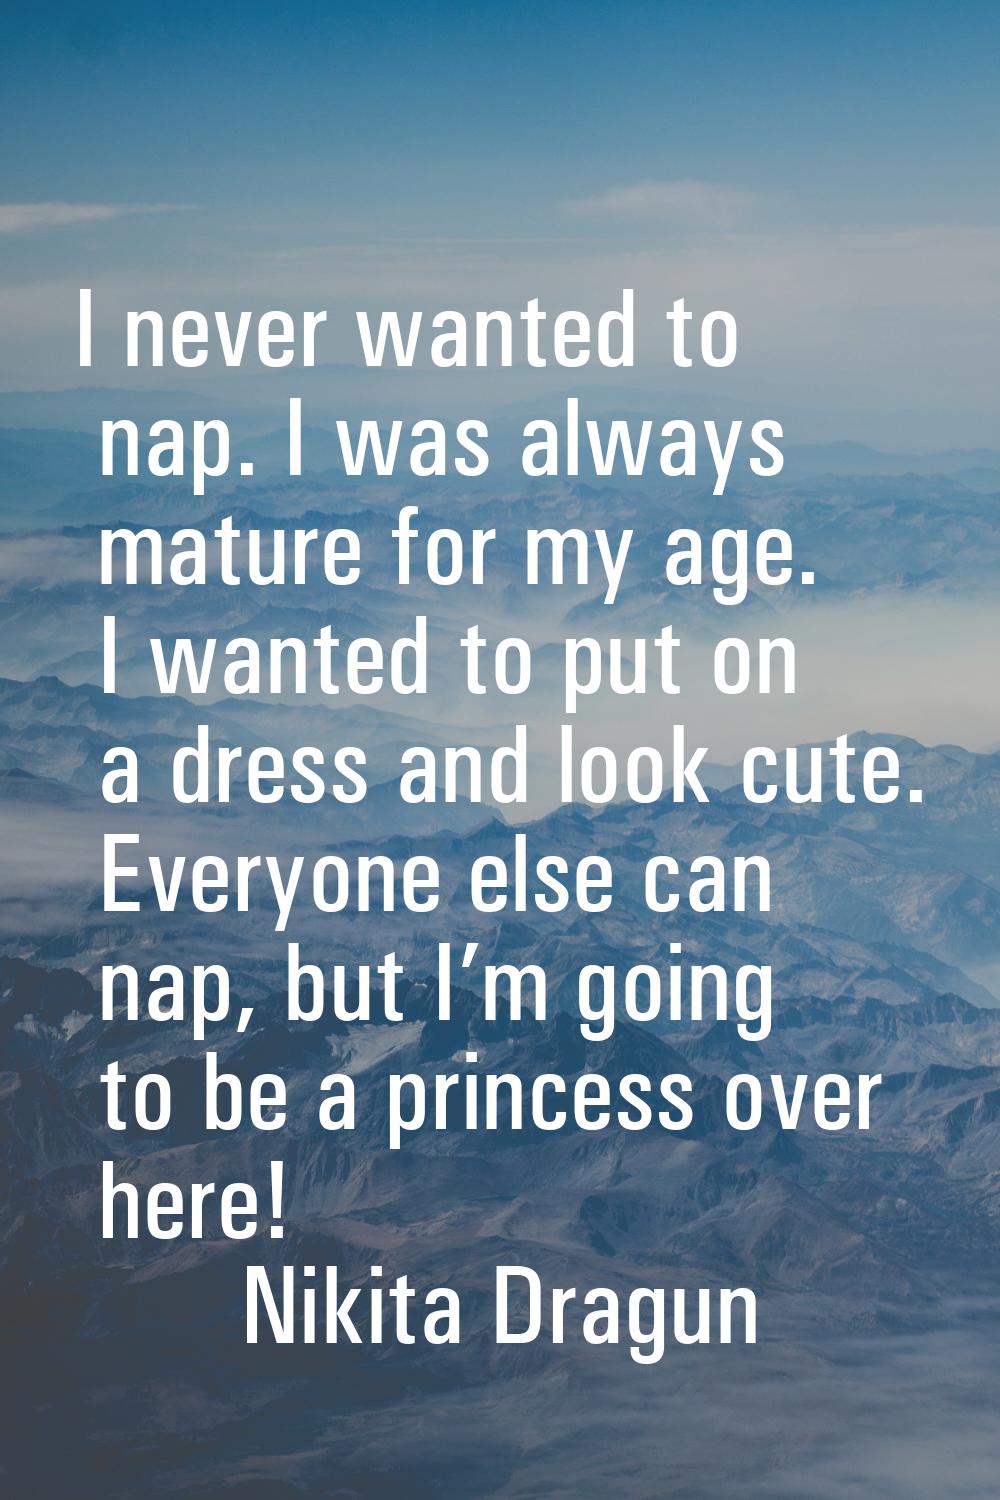 I never wanted to nap. I was always mature for my age. I wanted to put on a dress and look cute. Ev